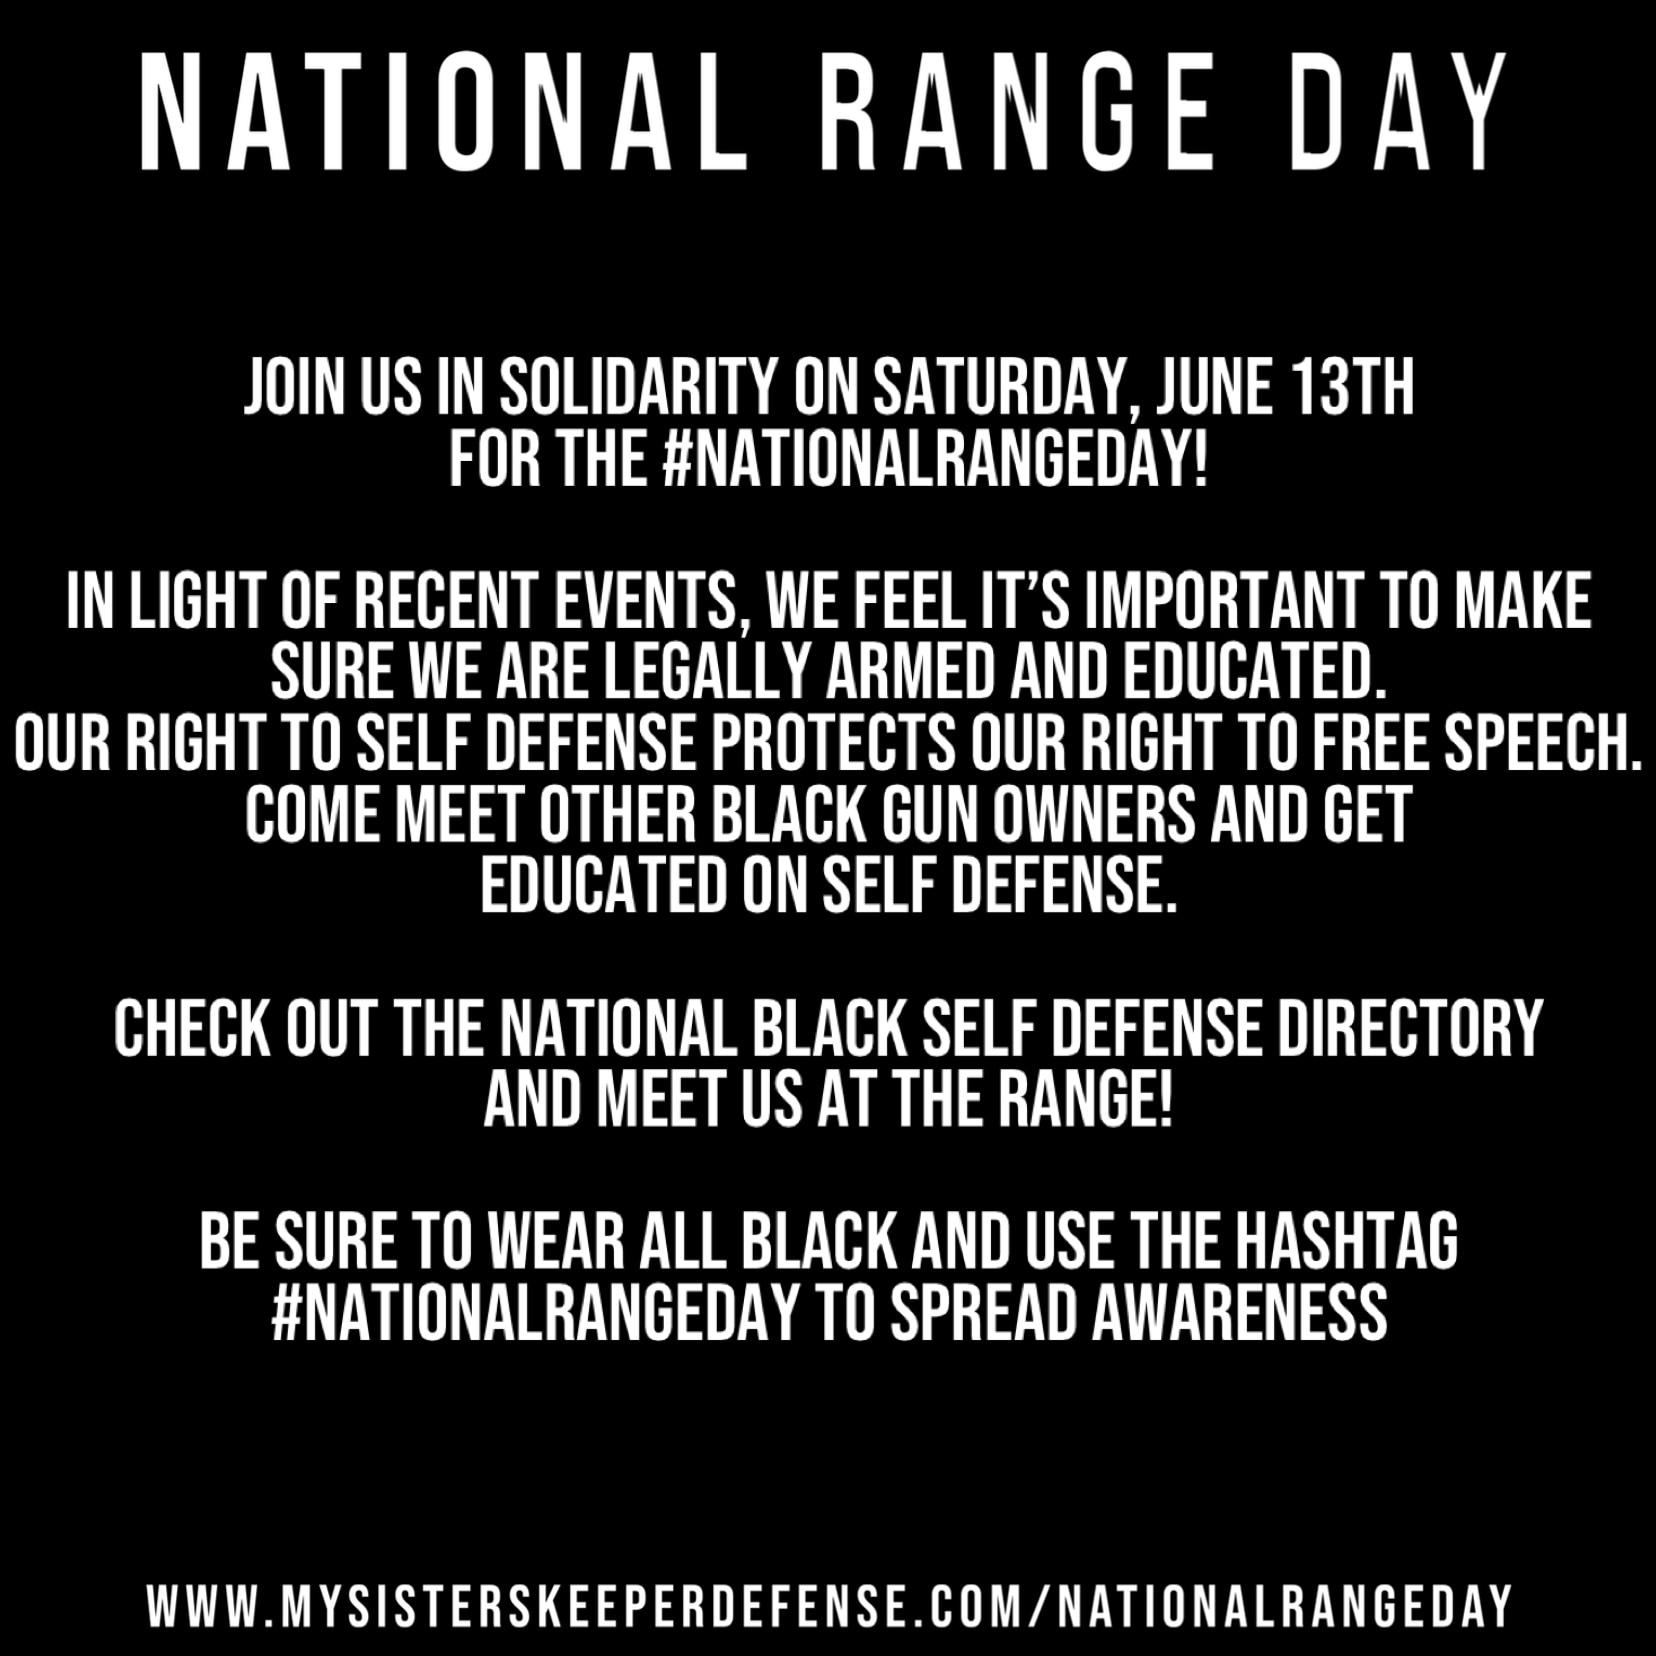 National Range Day Encourages Black Guns Owners to Head to the Range